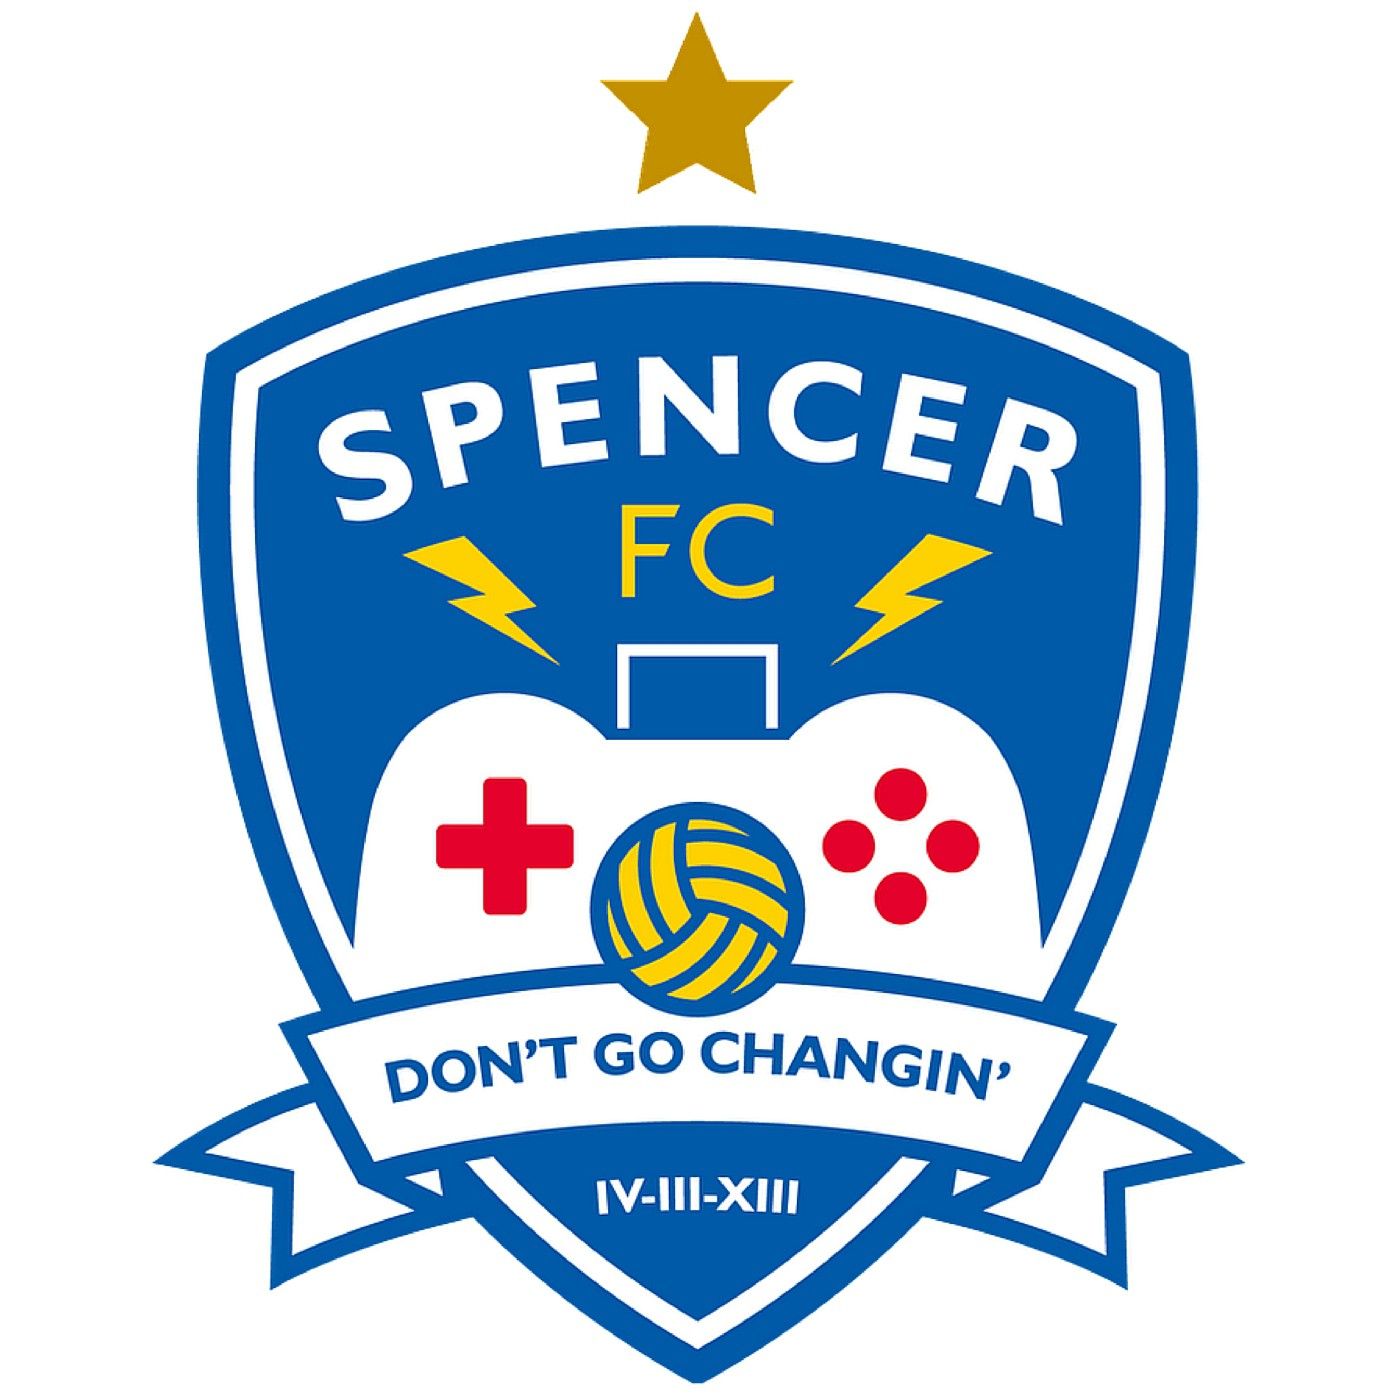 The Spencer FC Podcast